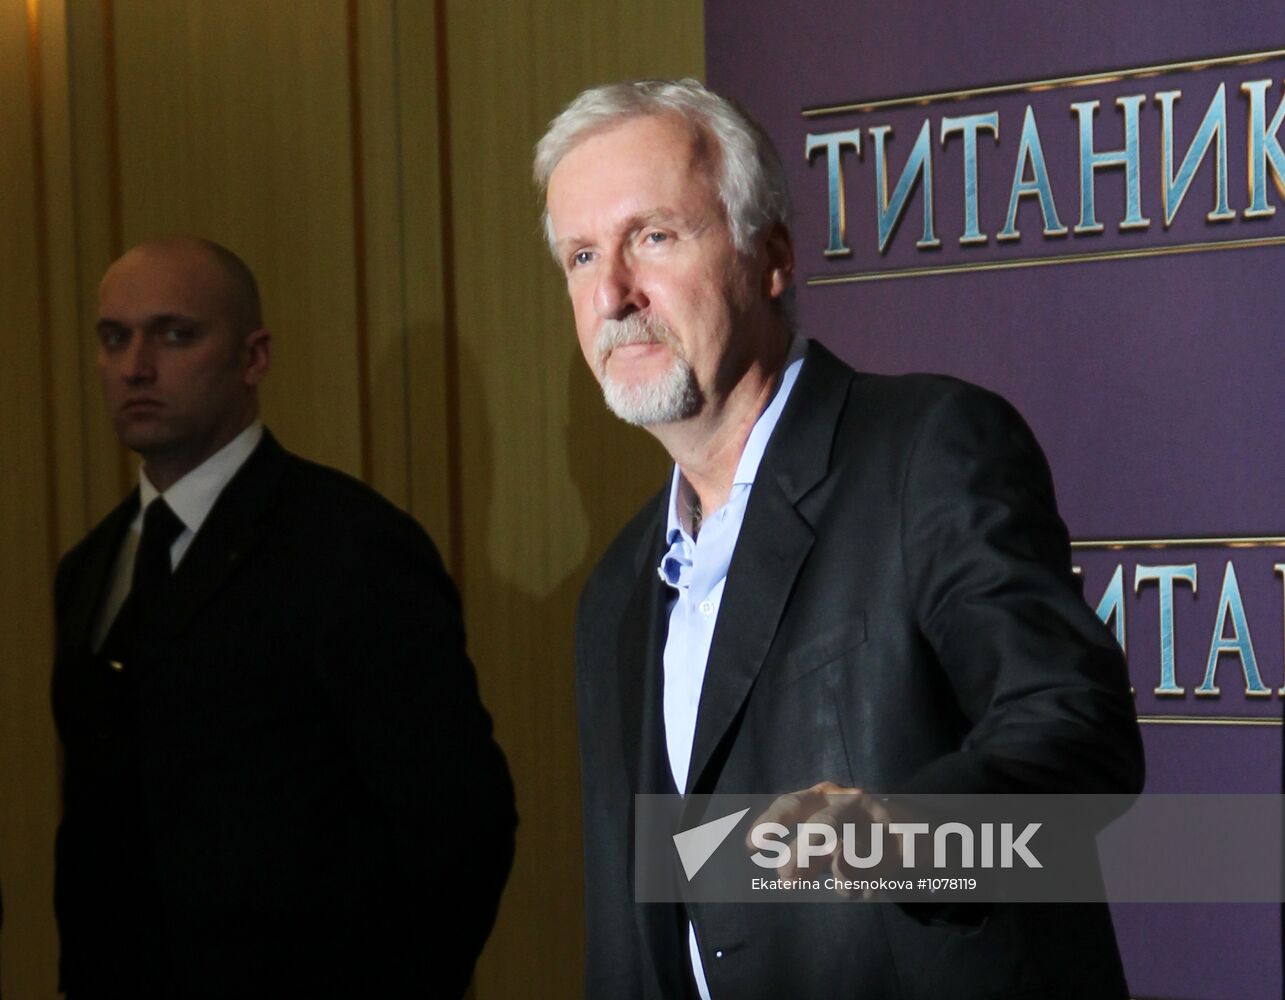 Photo call with James Cameron in Moscow